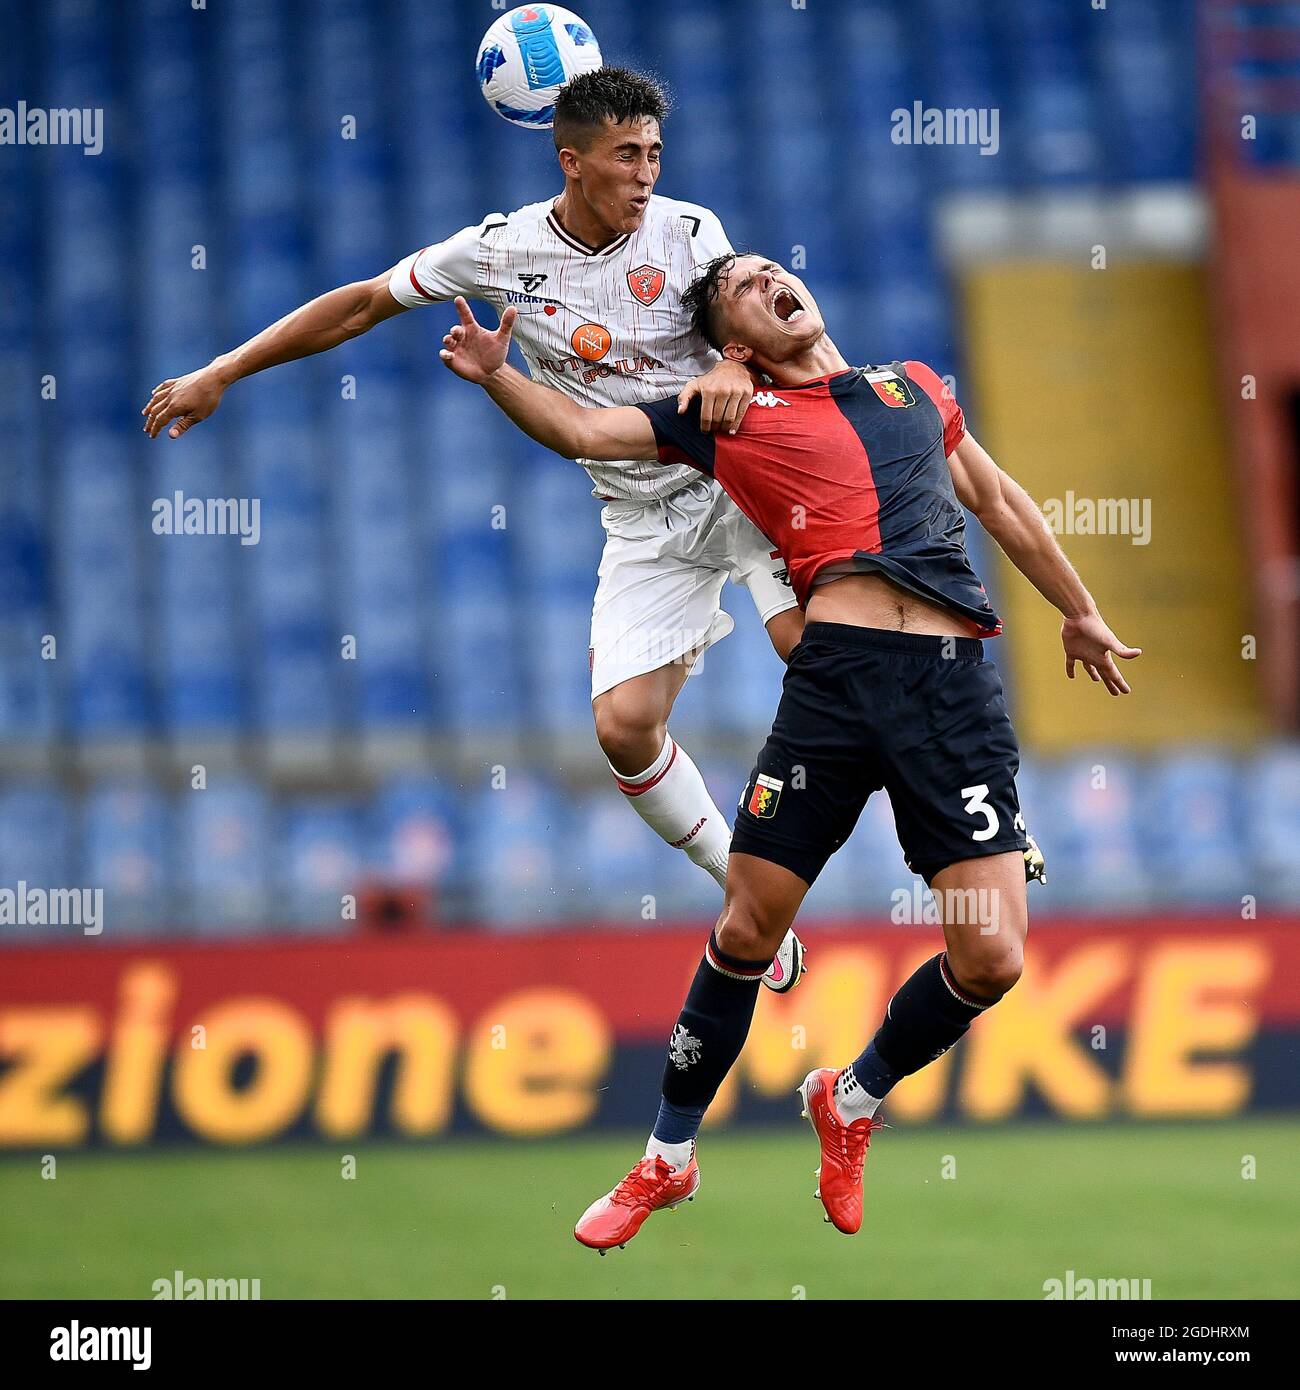 Genoa, Italy. 13 August 2021. Samuele Righetti (L) of AC Perugia competes for a header with Zinho Vanheusden of Genoa CFC during the Coppa Italia football match between Genoa CFC and AC Perugia. Credit: Nicolò Campo/Alamy Live News Stock Photo